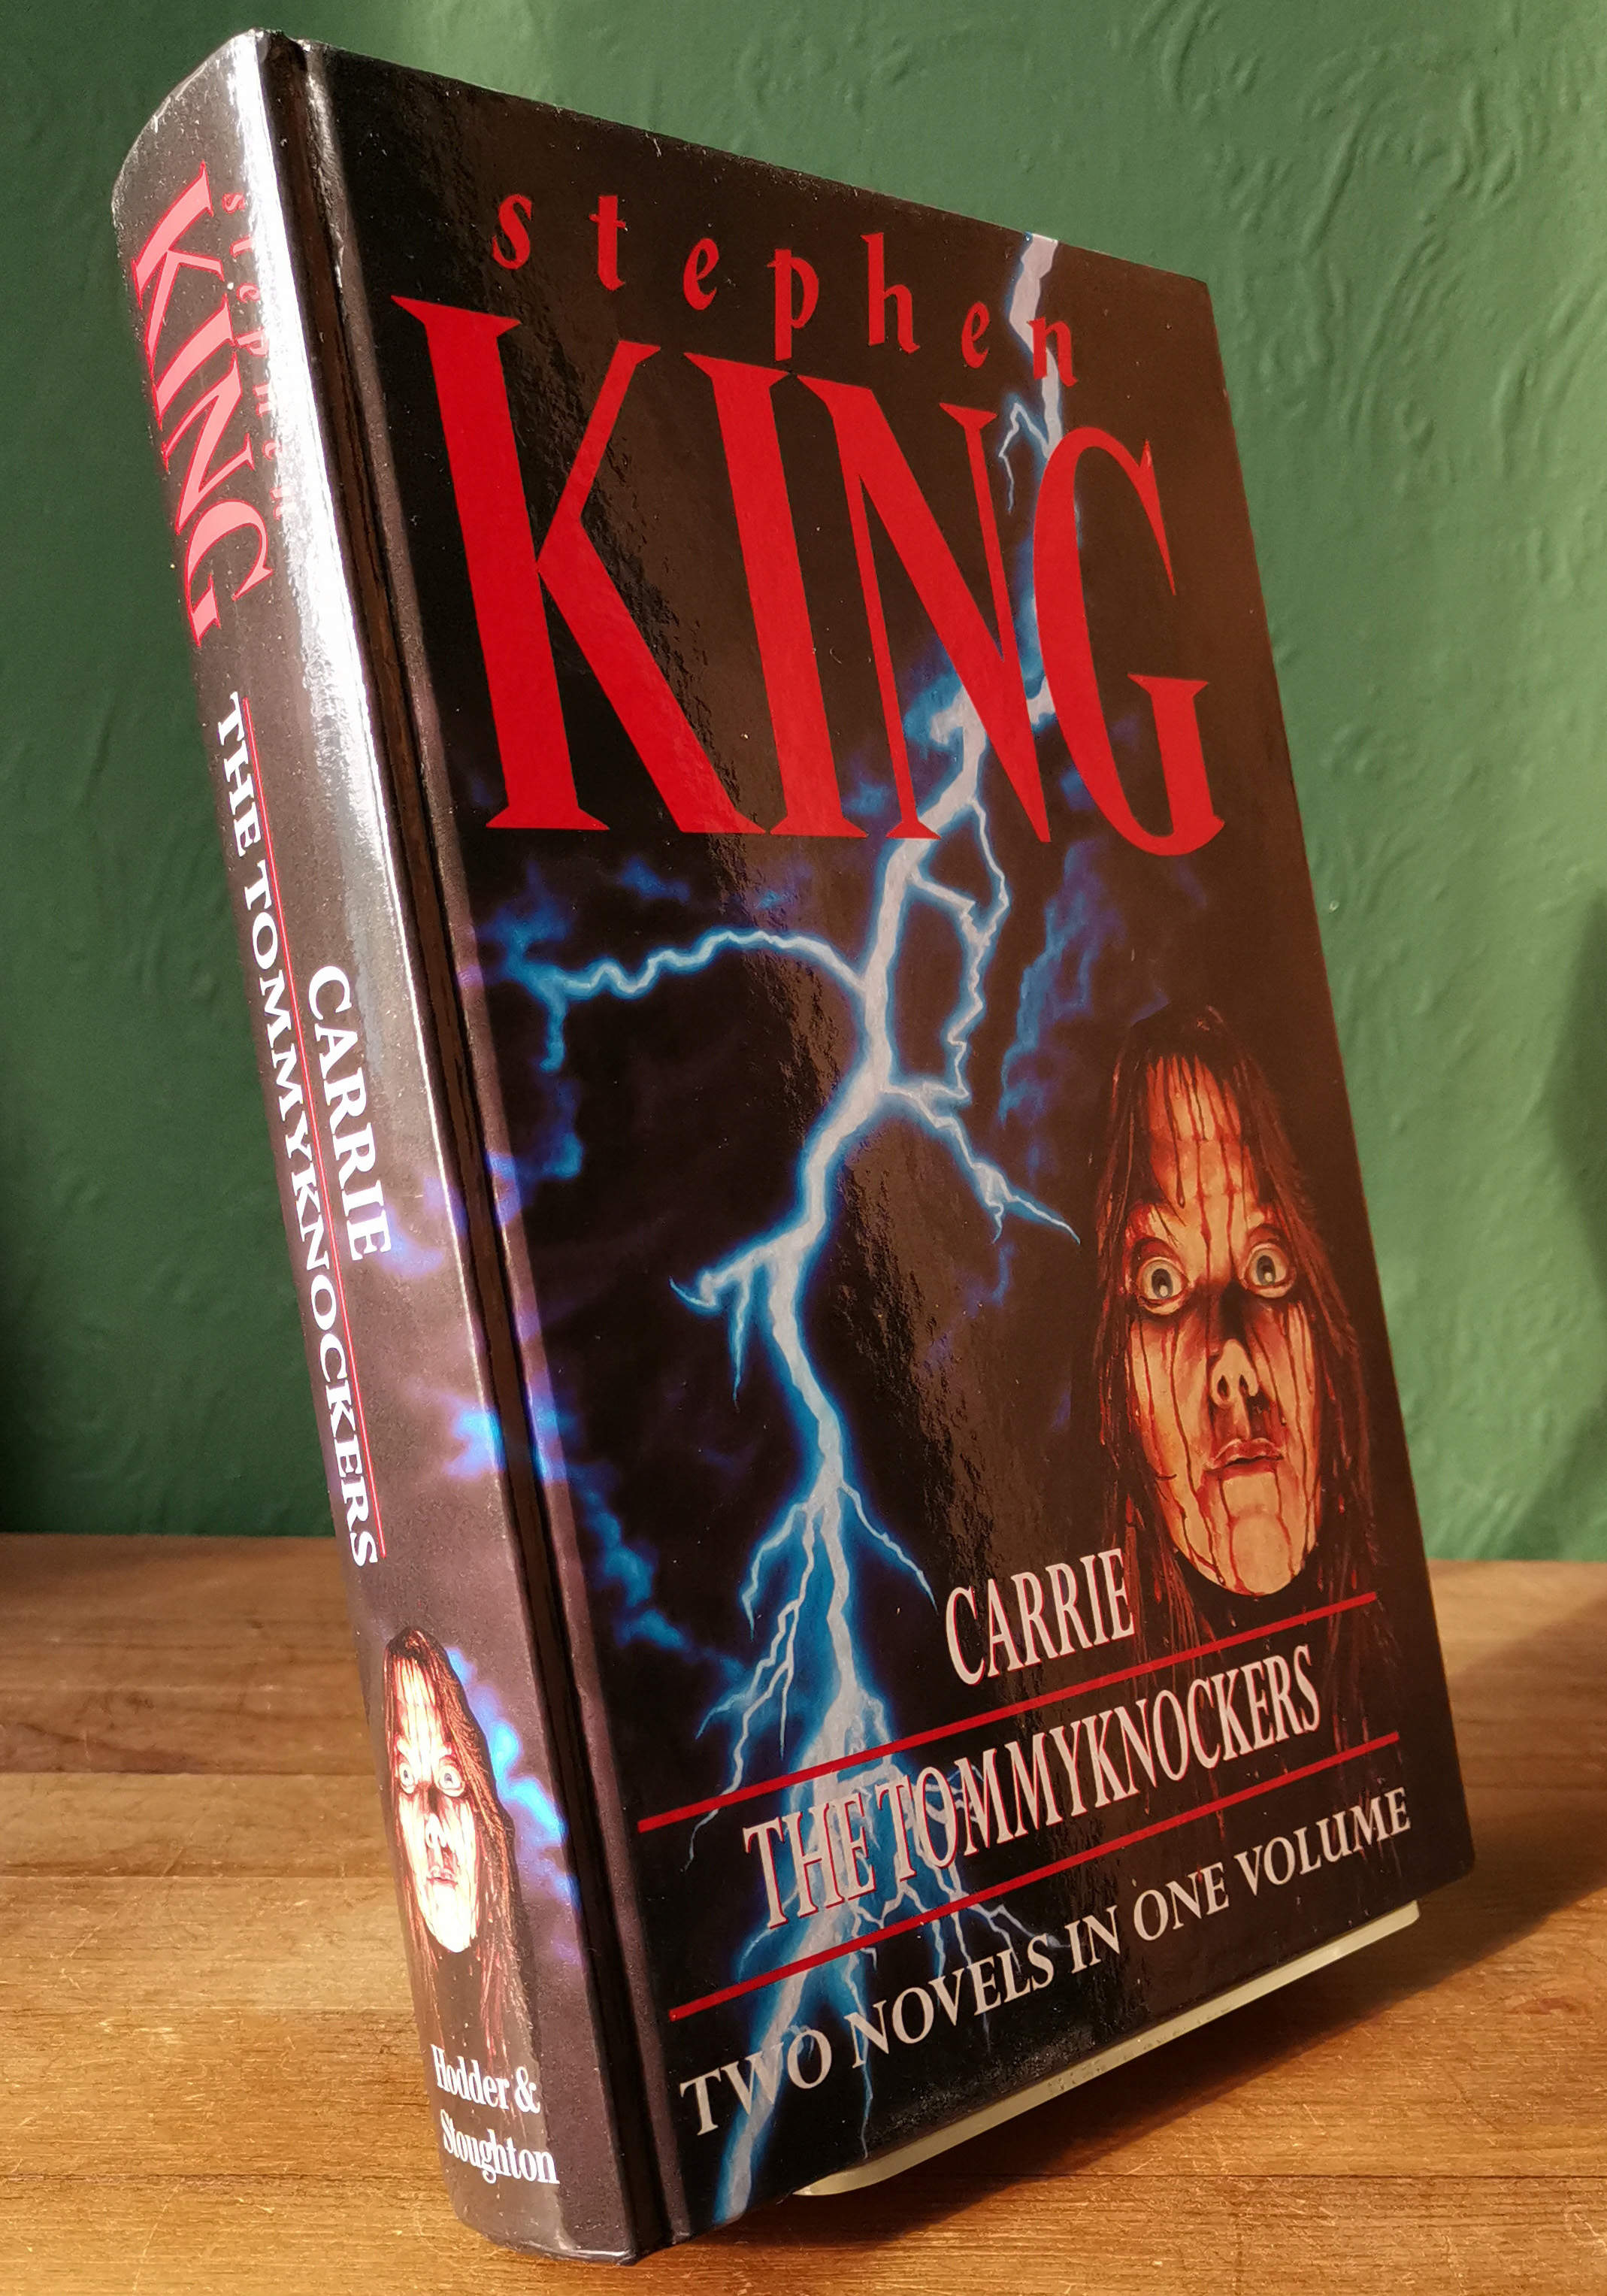 Carrie / The Tommyknockers UK 1st Edition